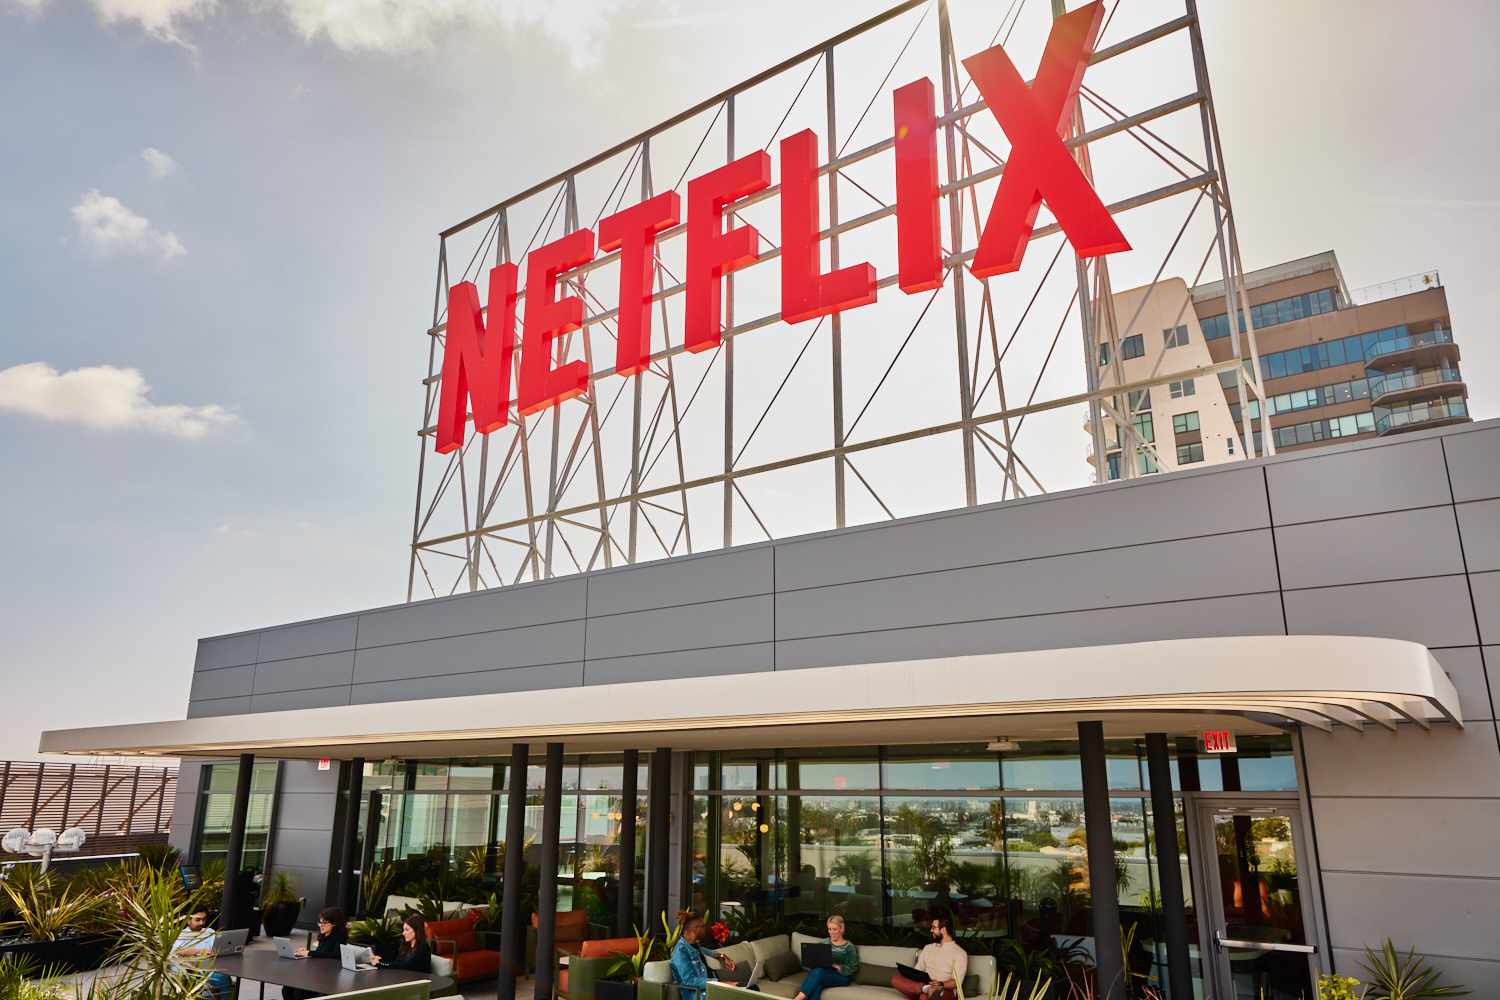 Netflix Customers Could Face Criminal Charges for Sharing Their Password